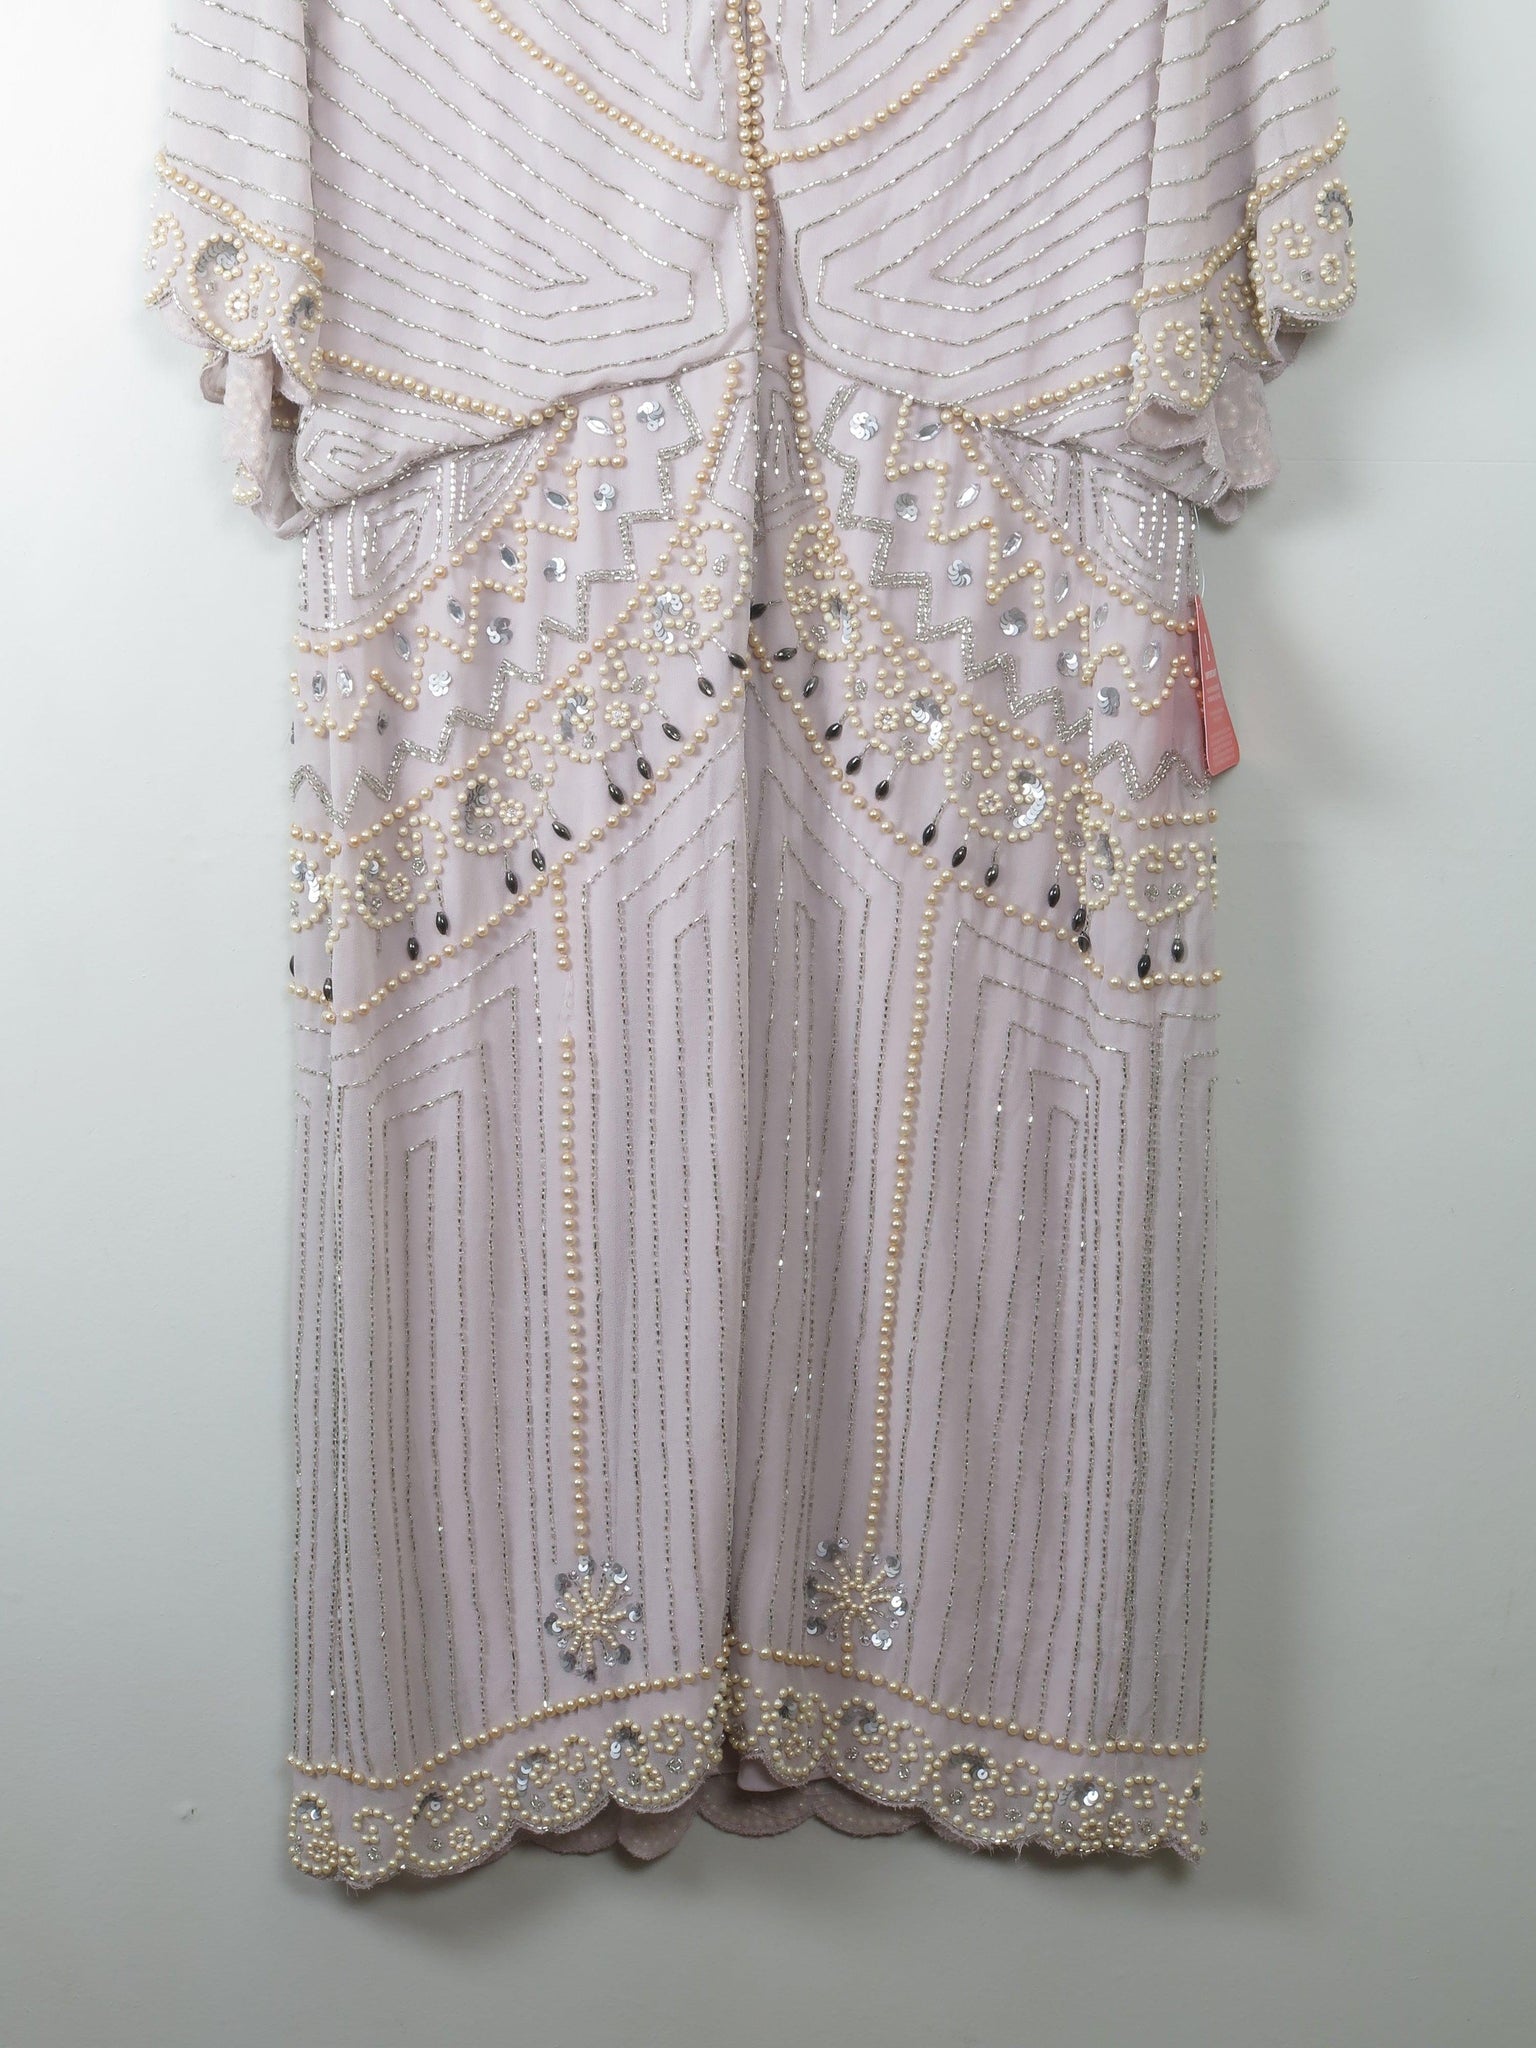 Vintage Style Beaded Dress New 18 XL - The Harlequin